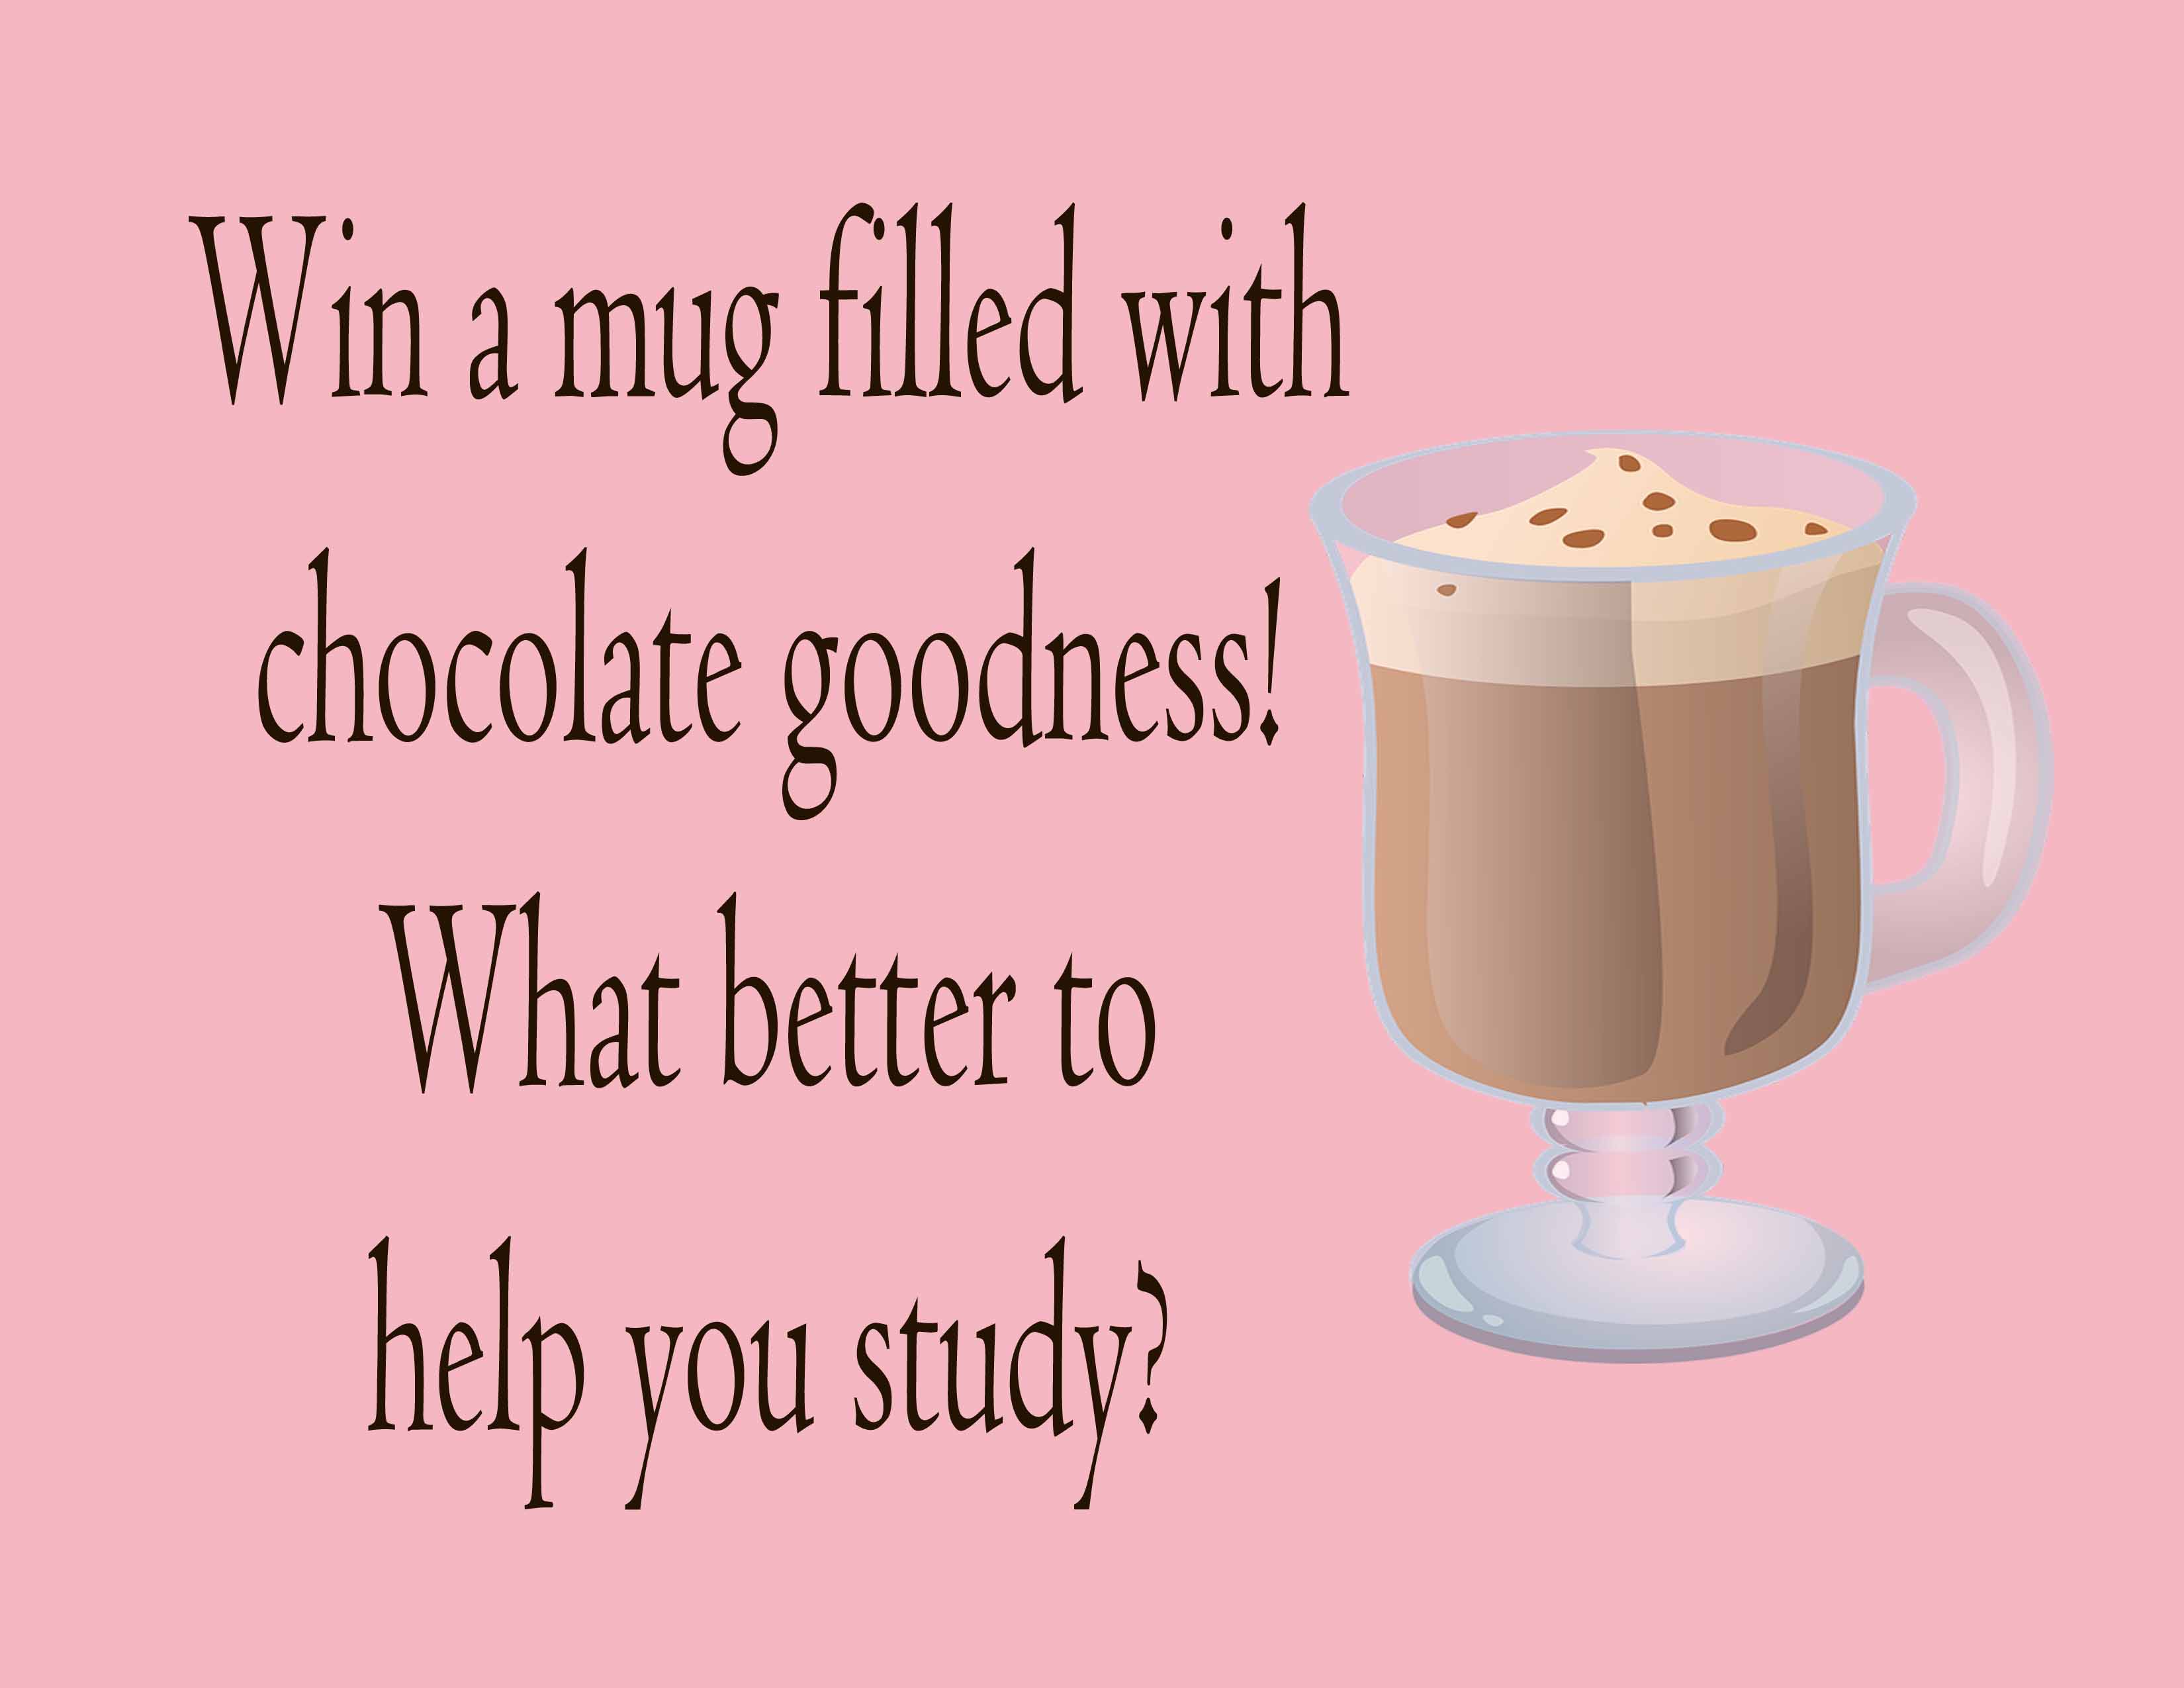 Hot chocolate what to win